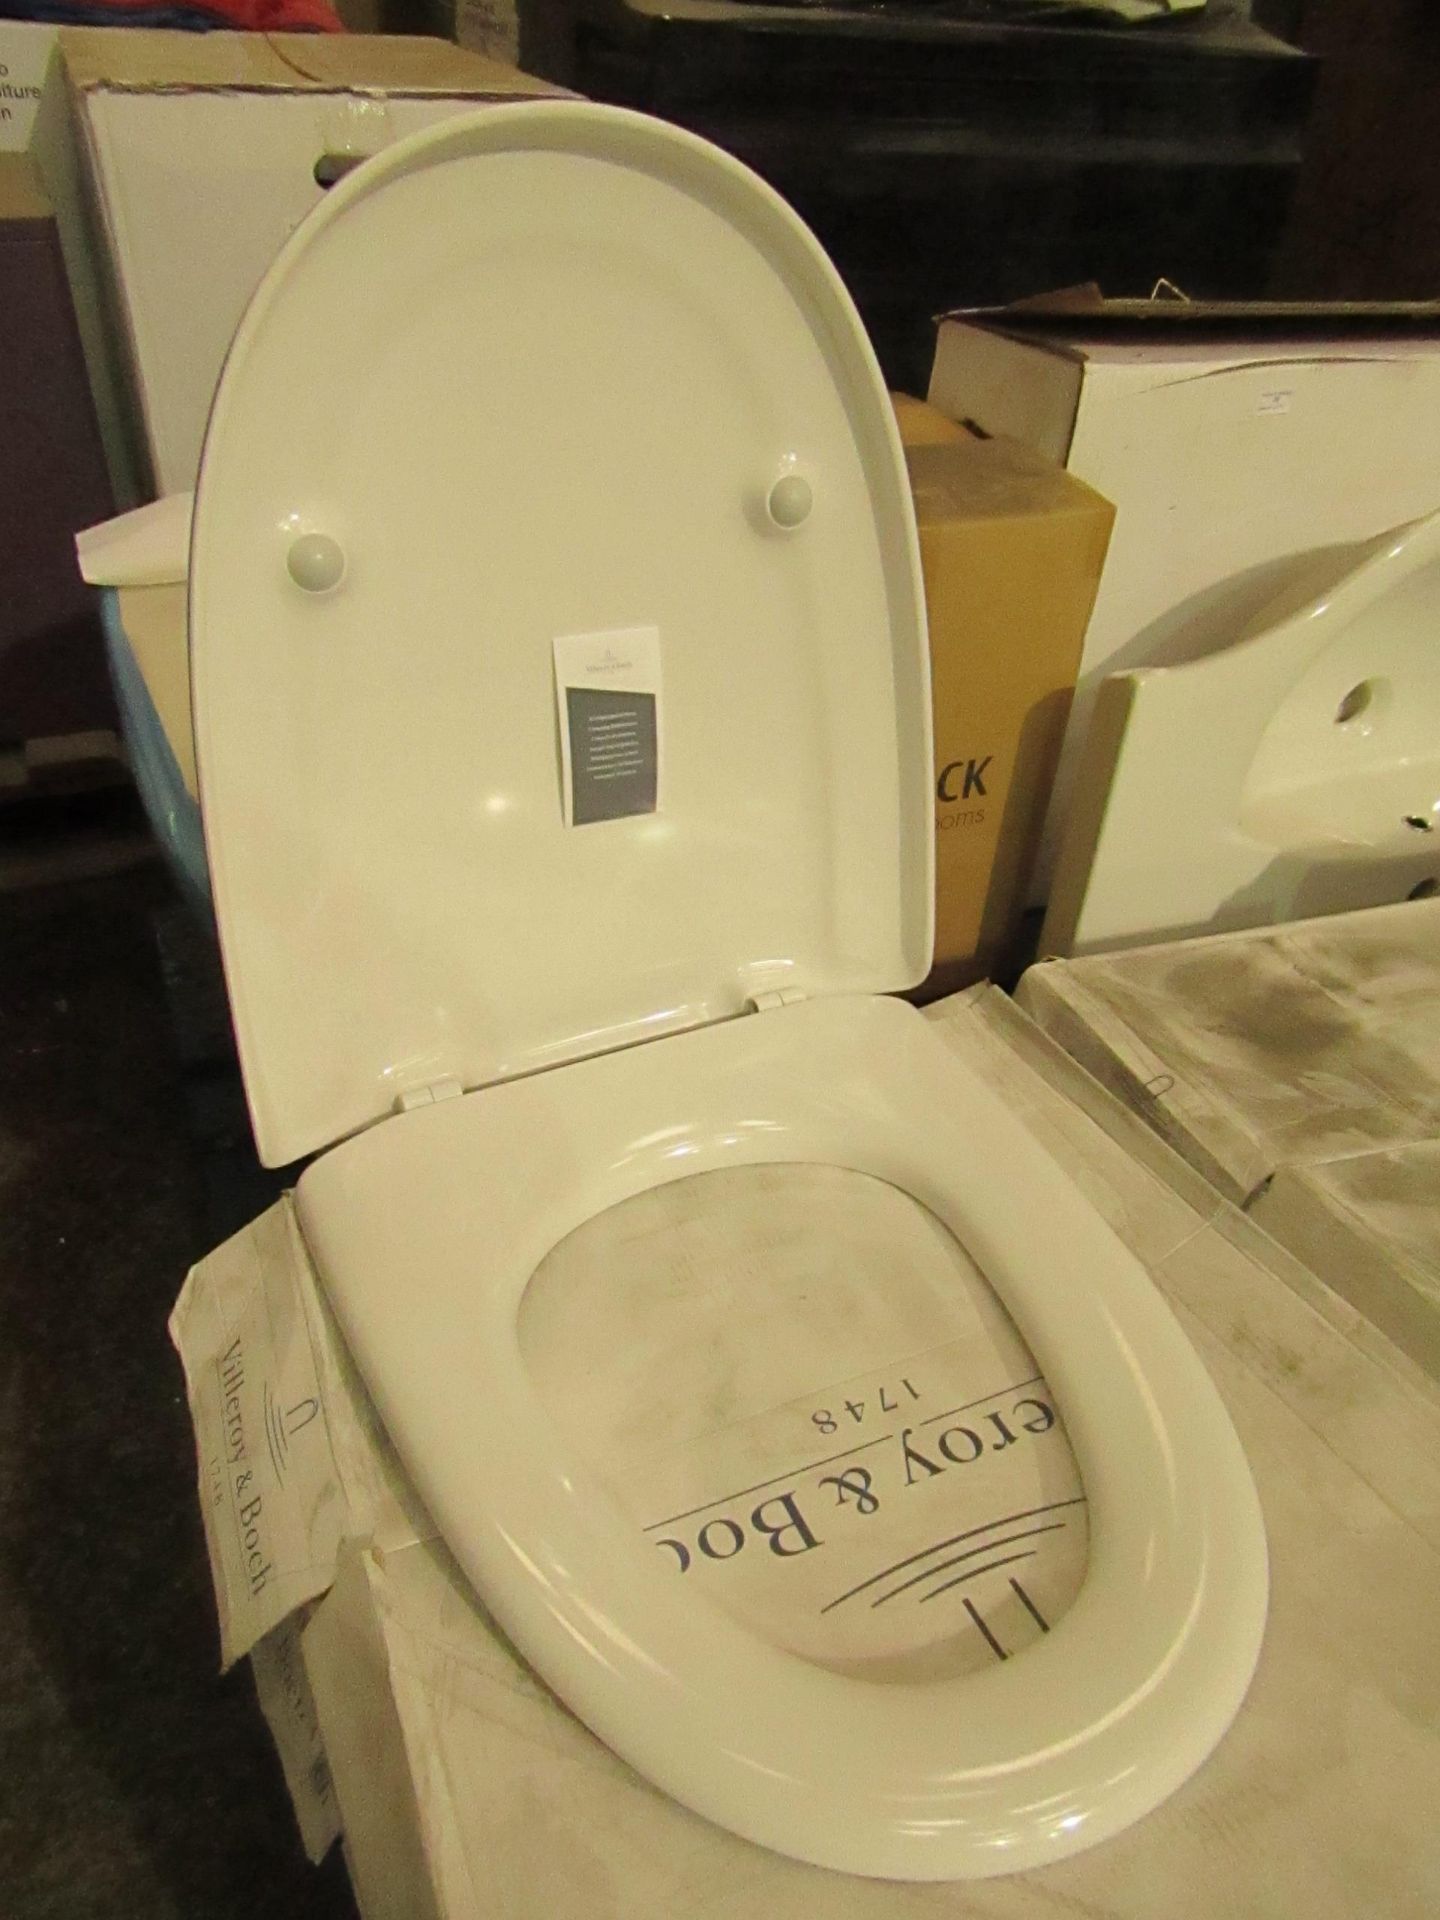 Villeroy and Boch toilet seat with cover, brand new and boxed.